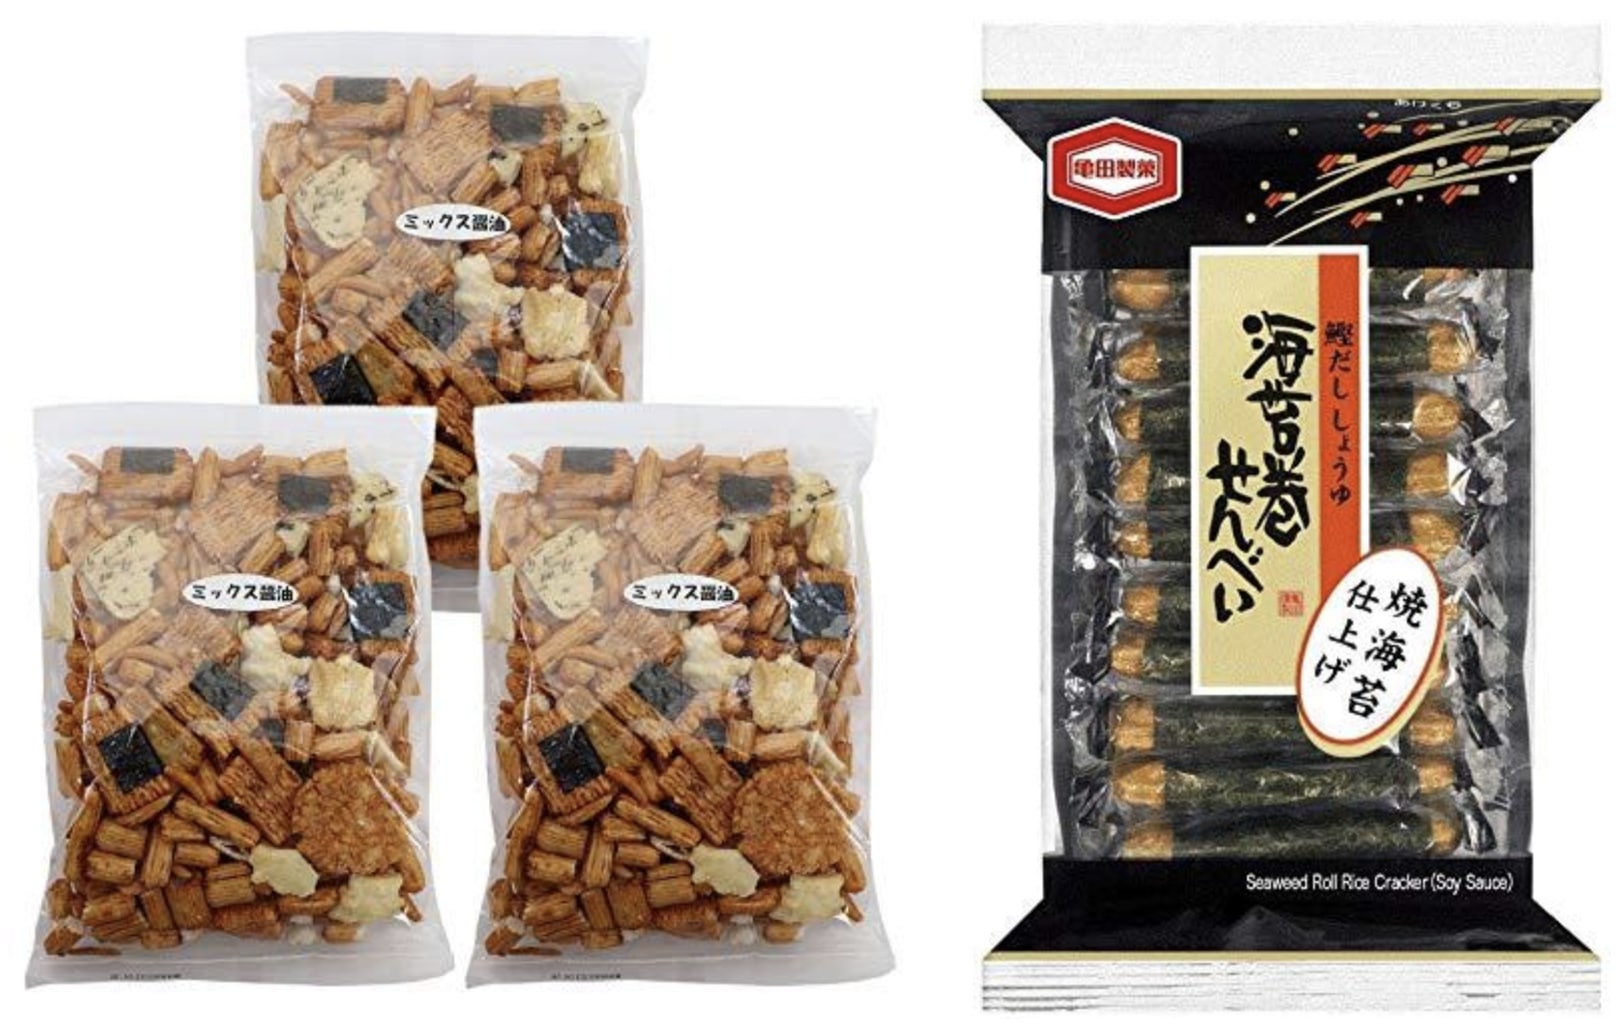 Two types of Japanese rice crackers found at ZenPlus